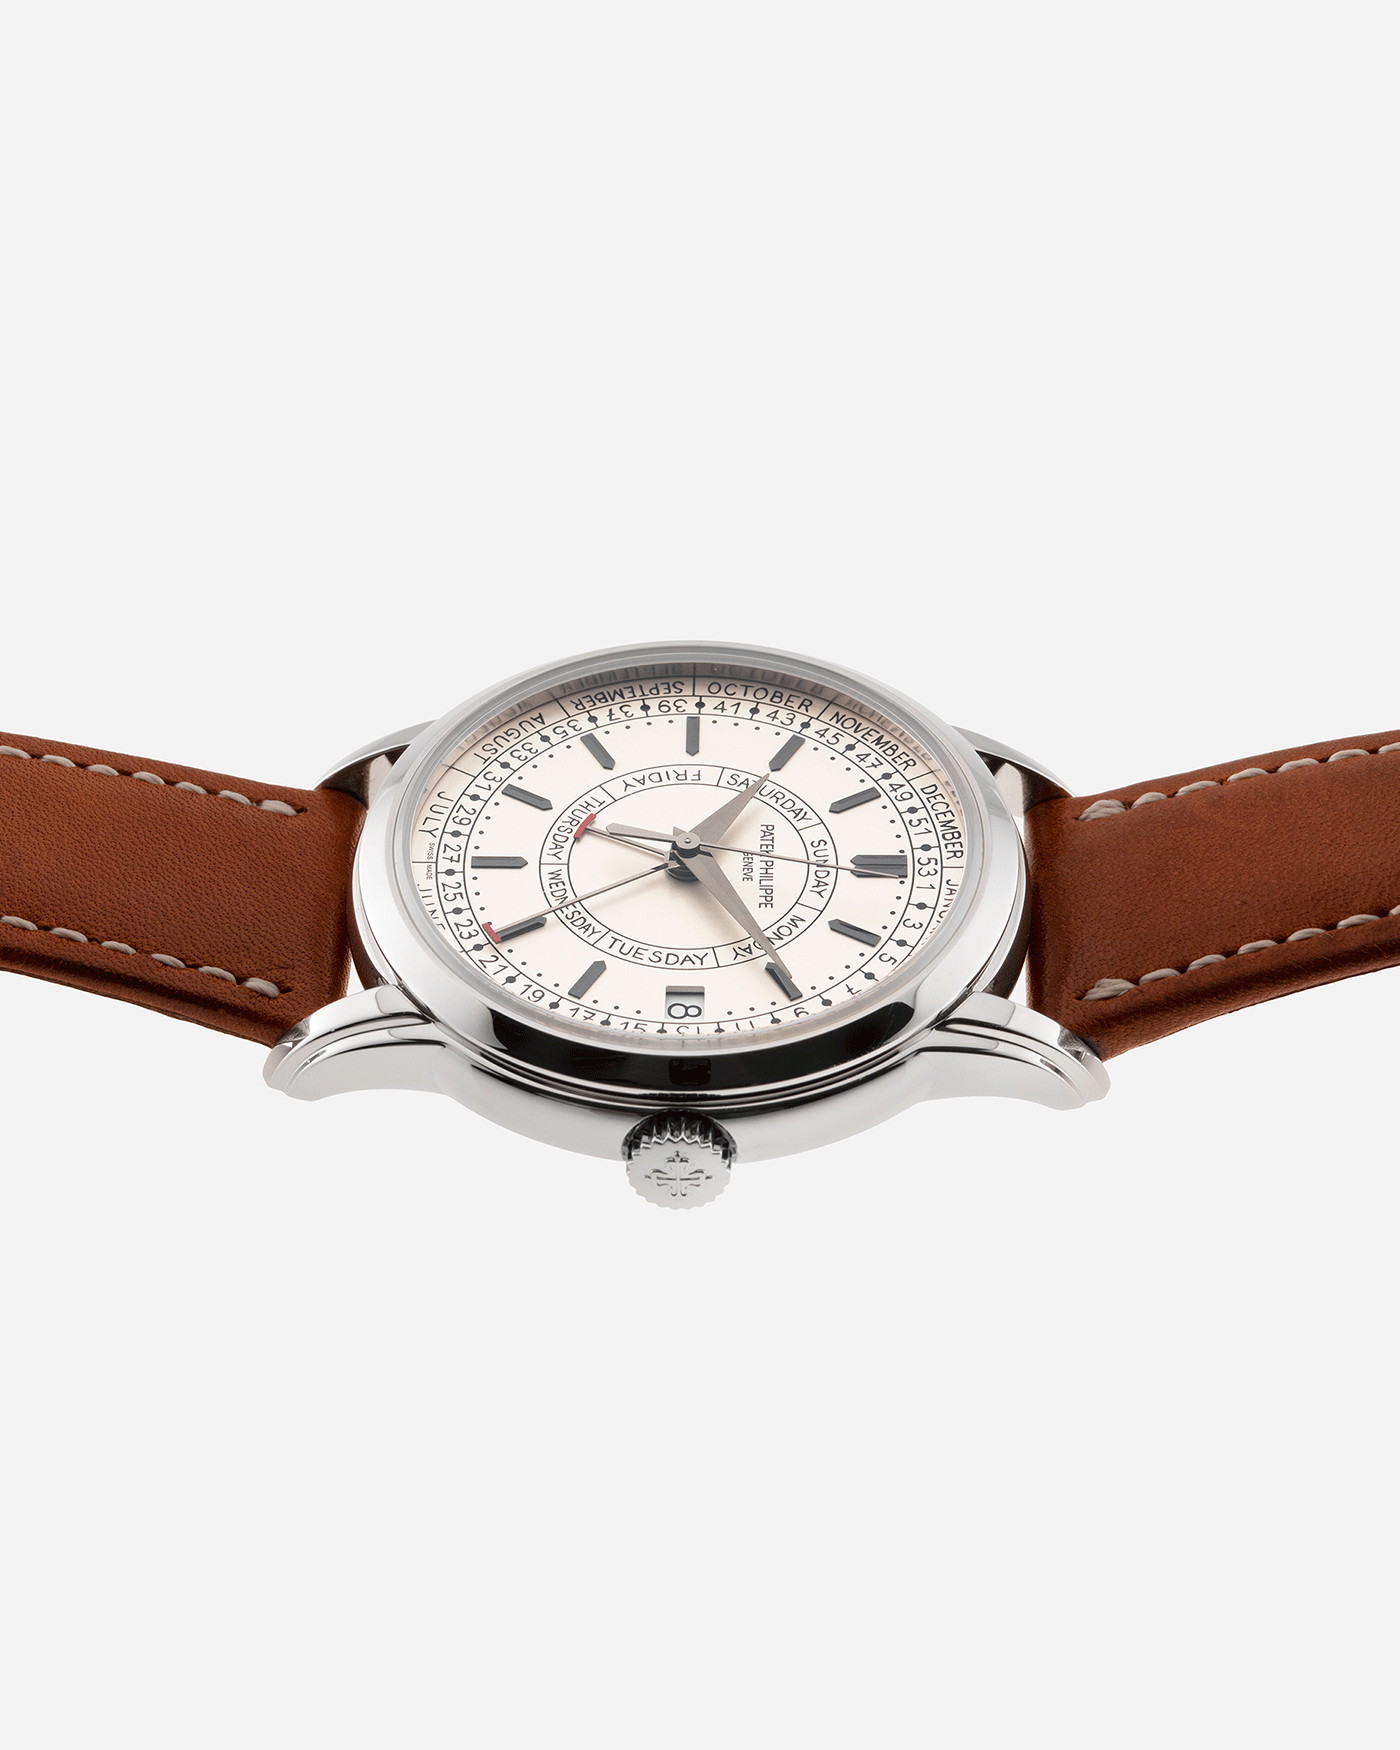 Brand: Patek Philippe Year: 2019 Model: Calatrava Weekly Calendar Reference Number: 5212A Material: Stainless Steel Movement: In-House Caliber 26 330 S C J SE Case Diameter: 40mm Bracelet: Patek Philippe Chestnut Brown Calfskin and Stainless Steel Tang Buckle